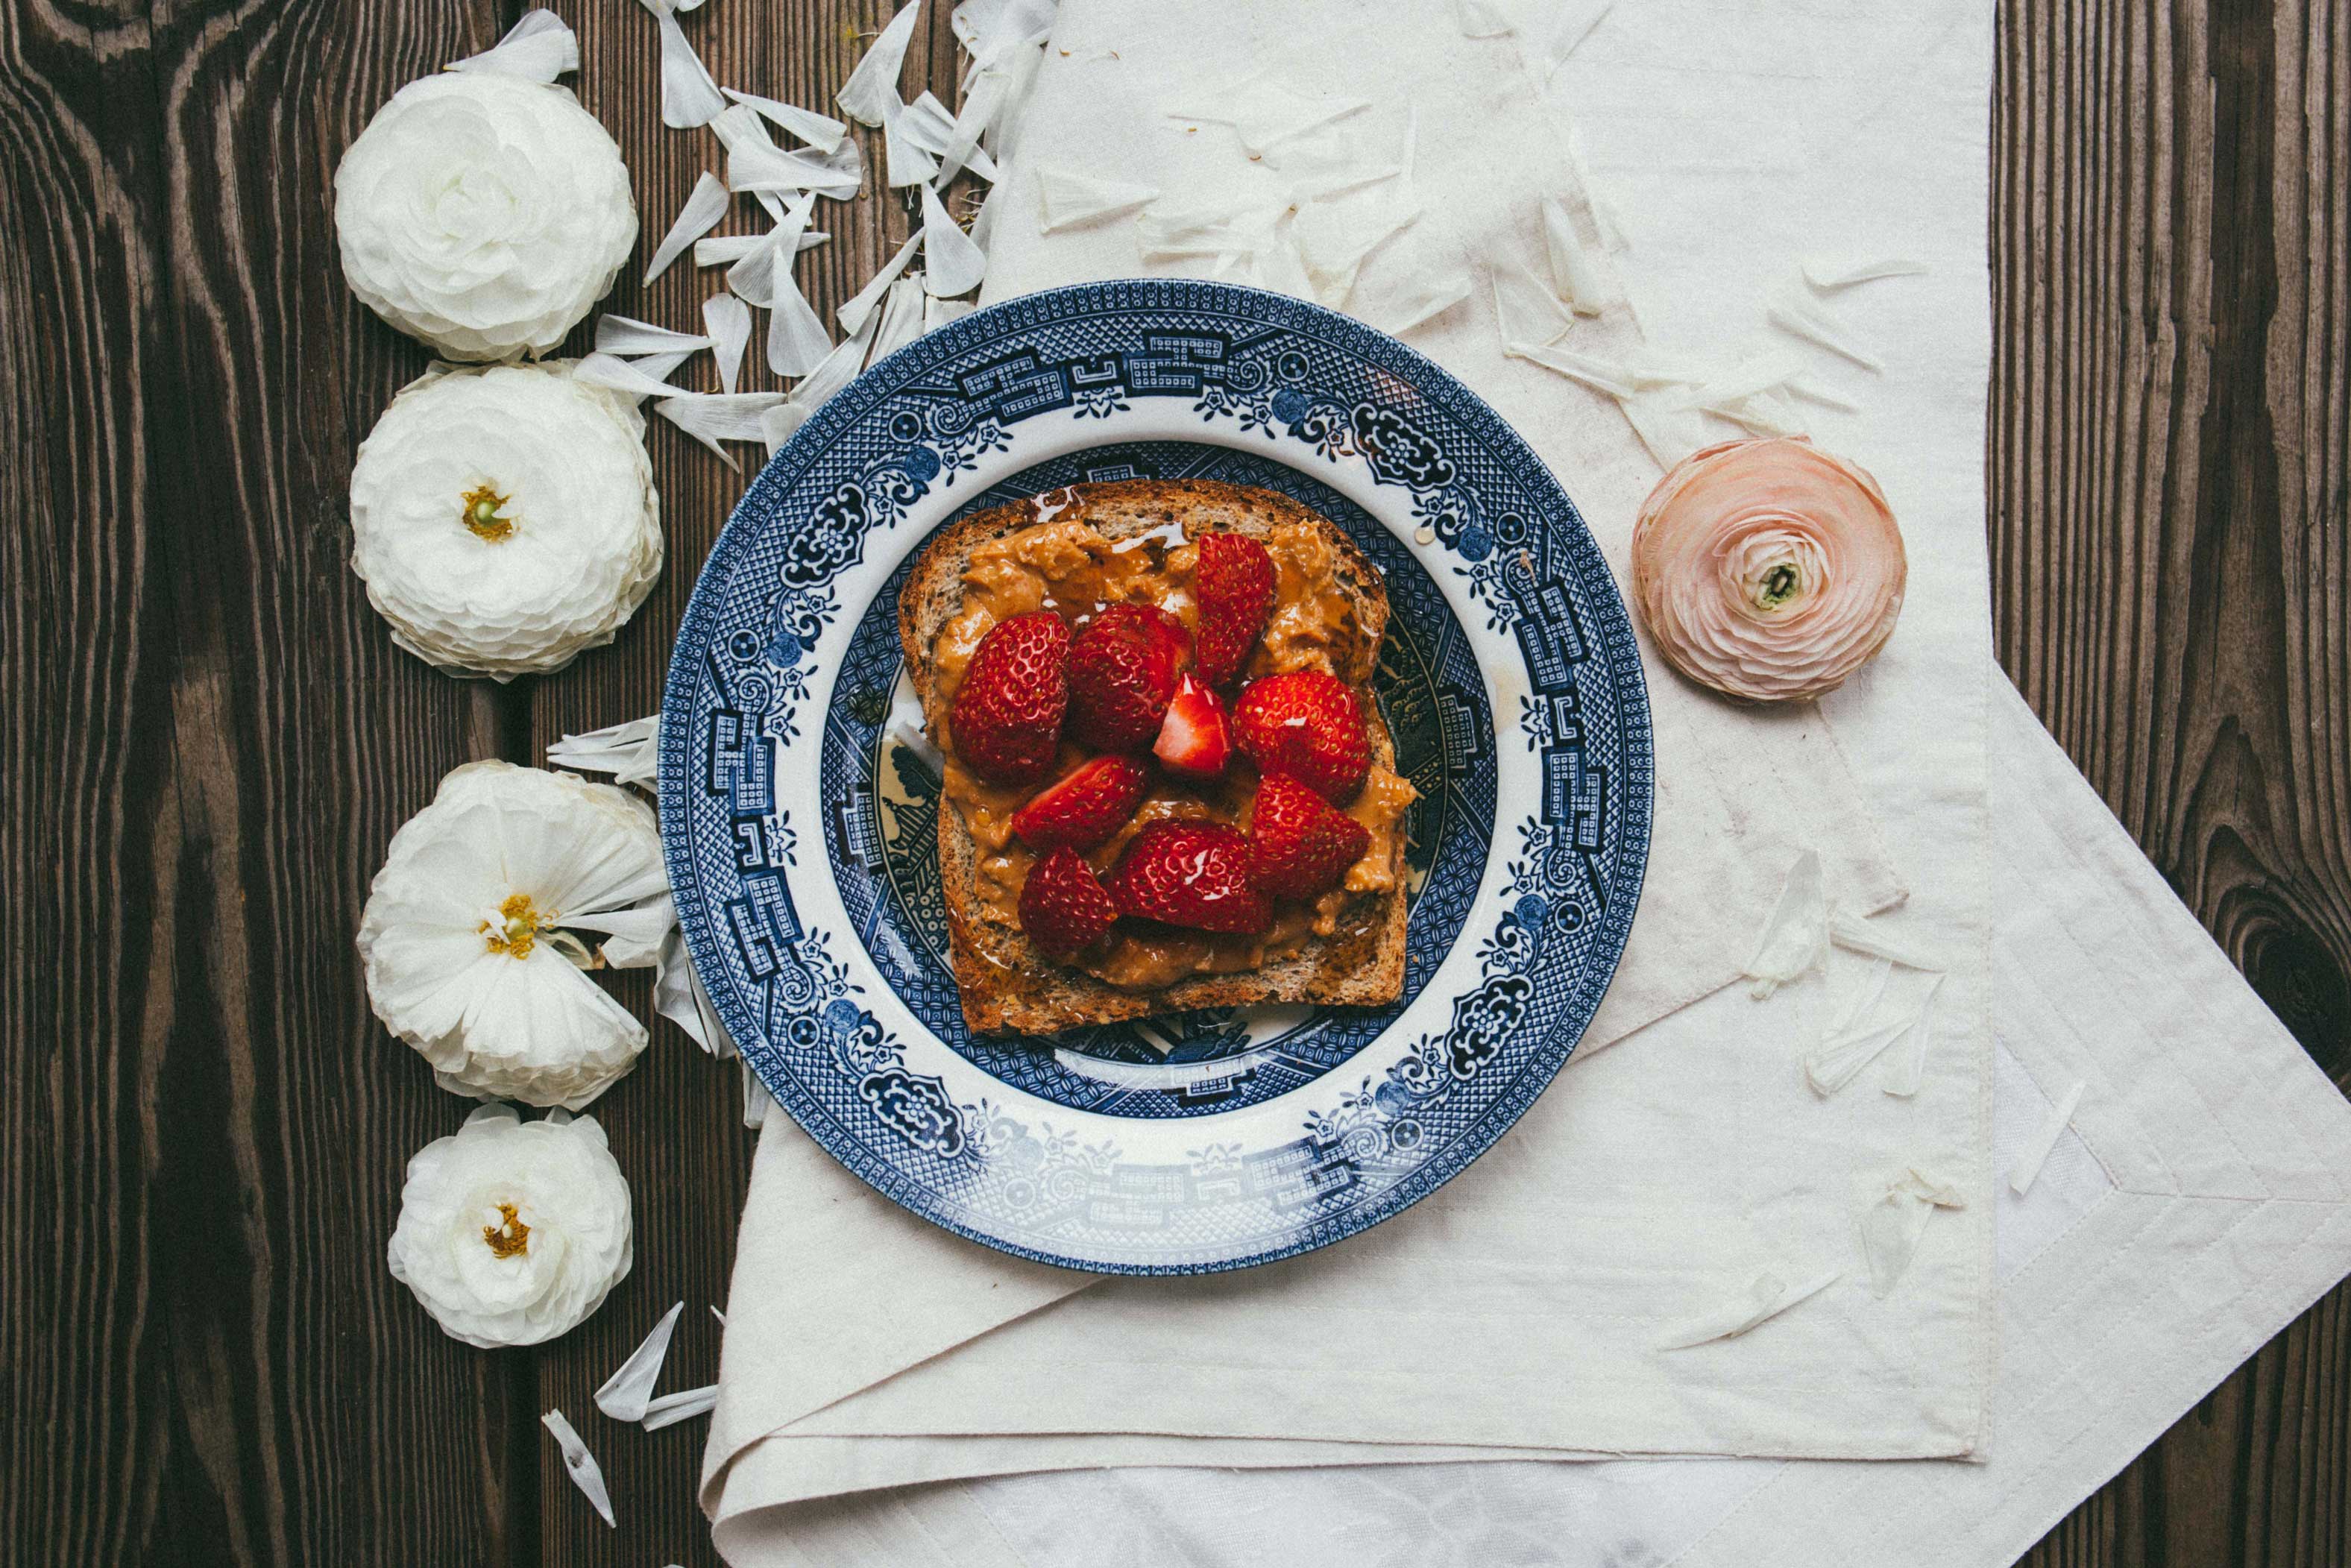 Peanut butter and fresh strawberries on toast